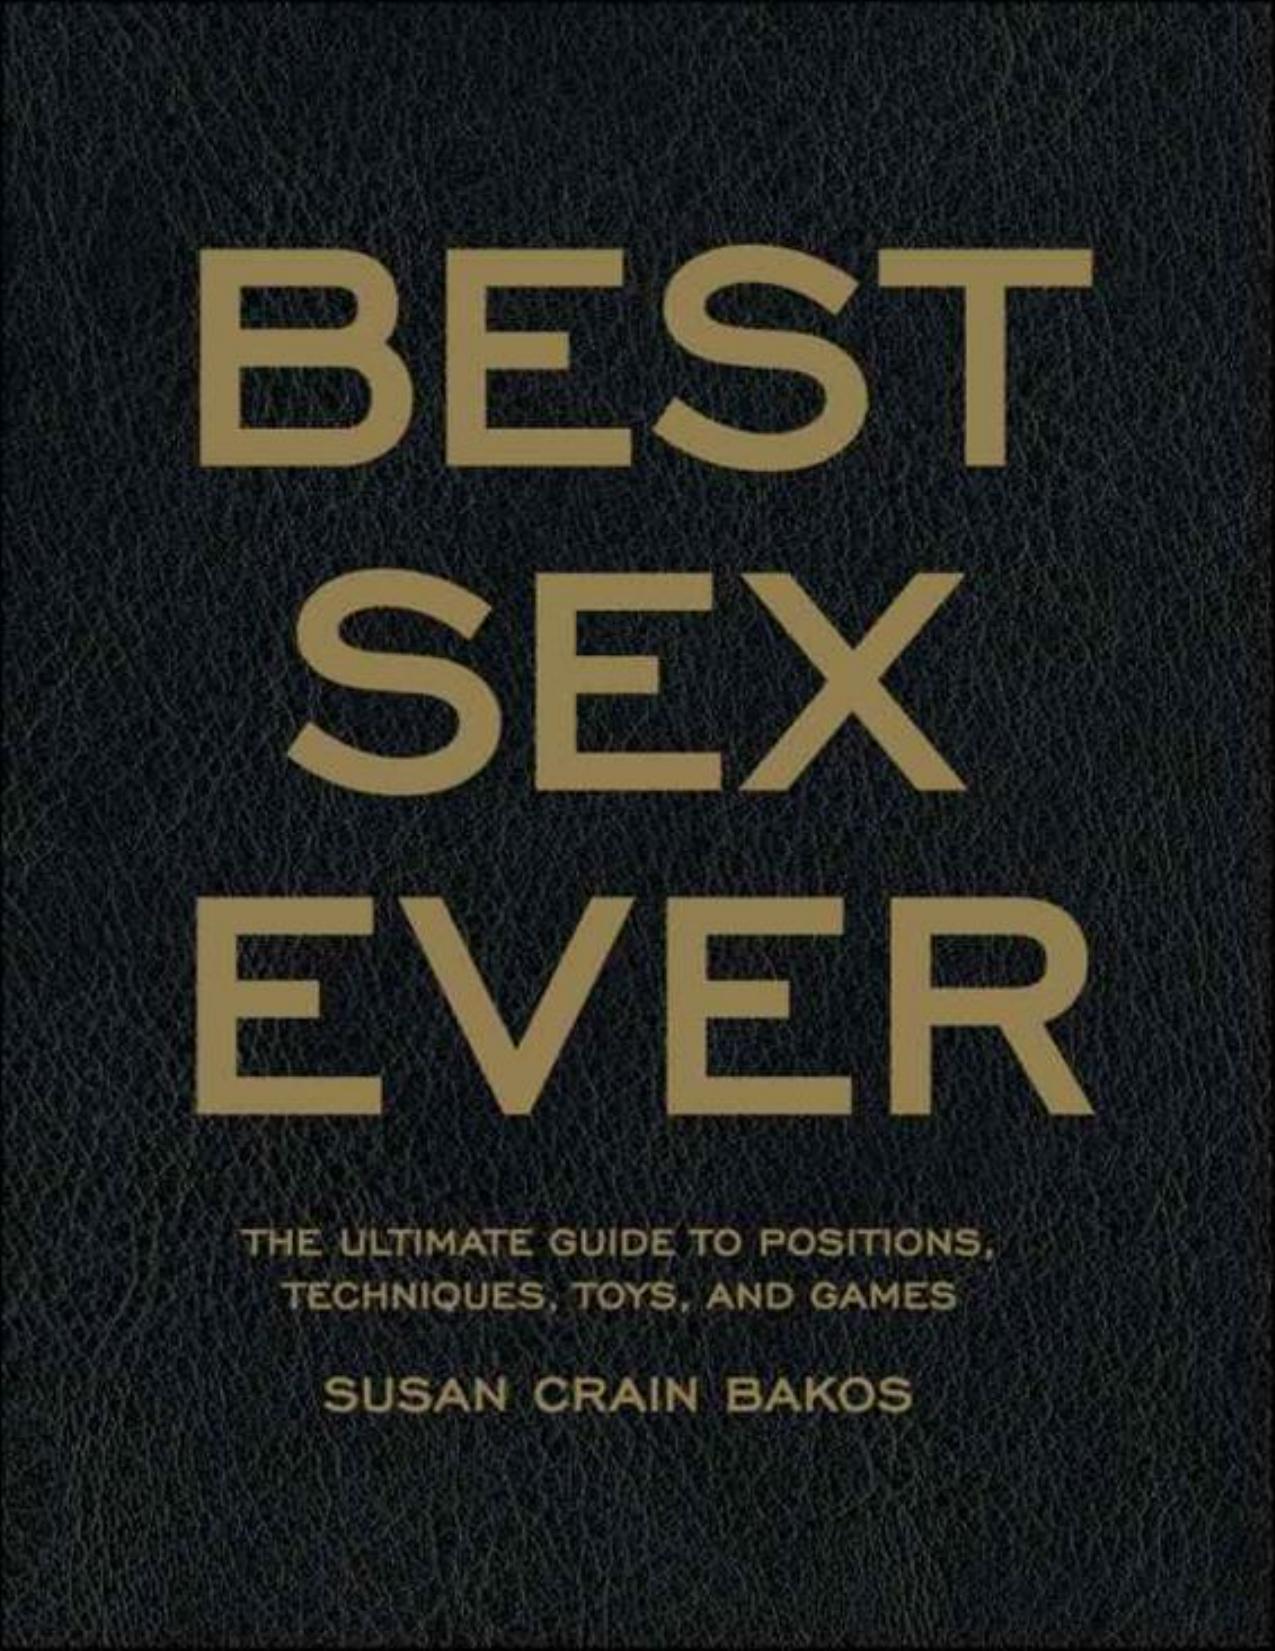 Best Sex Ever: The Ultimate Guide to Positions, Techniques, Toys, and Games by Susan Crain Bakos